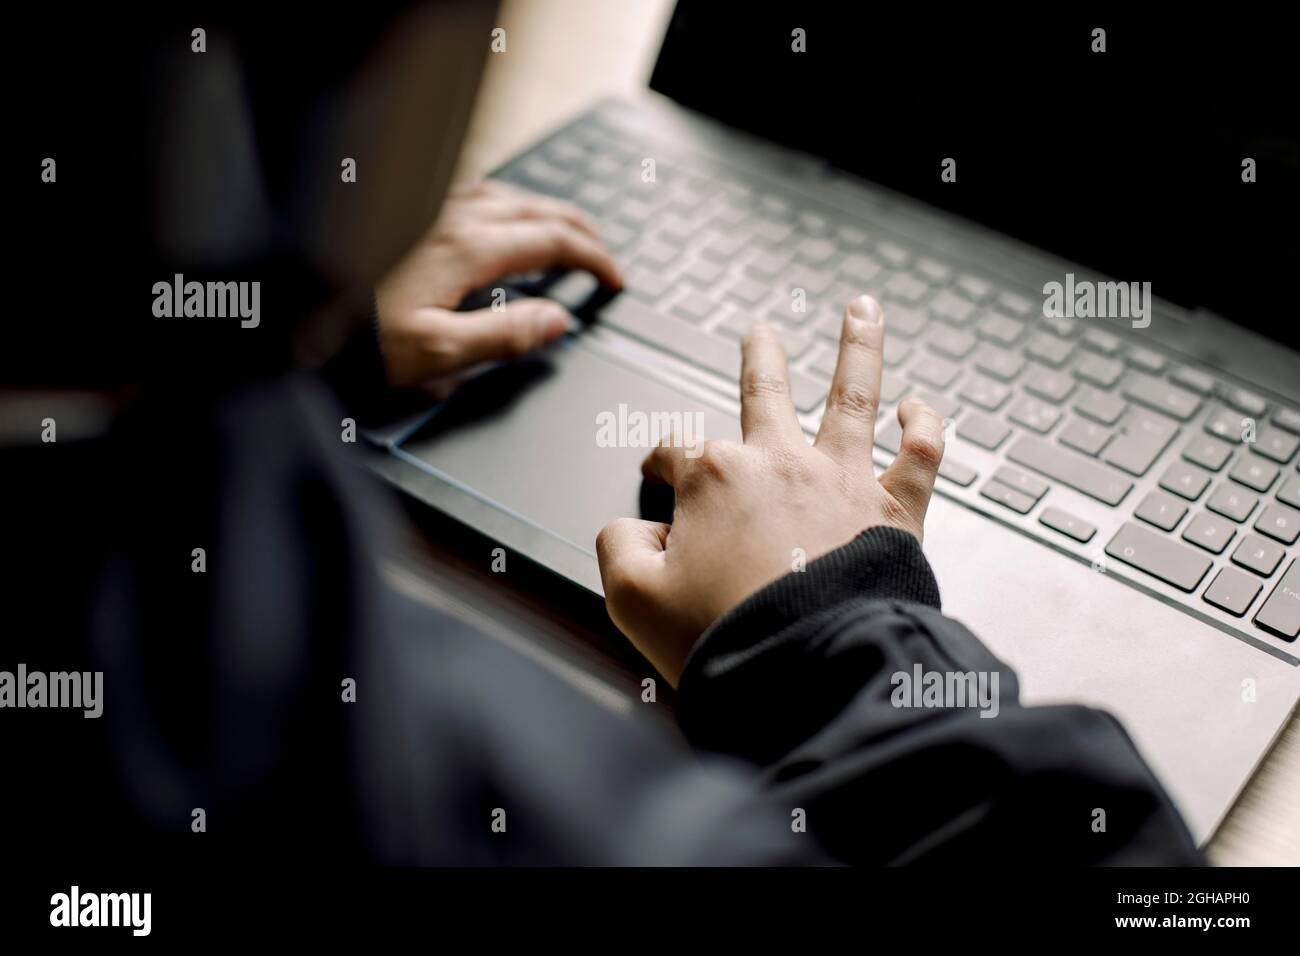 Midsection of boy playing game on laptop at home Stock Photo